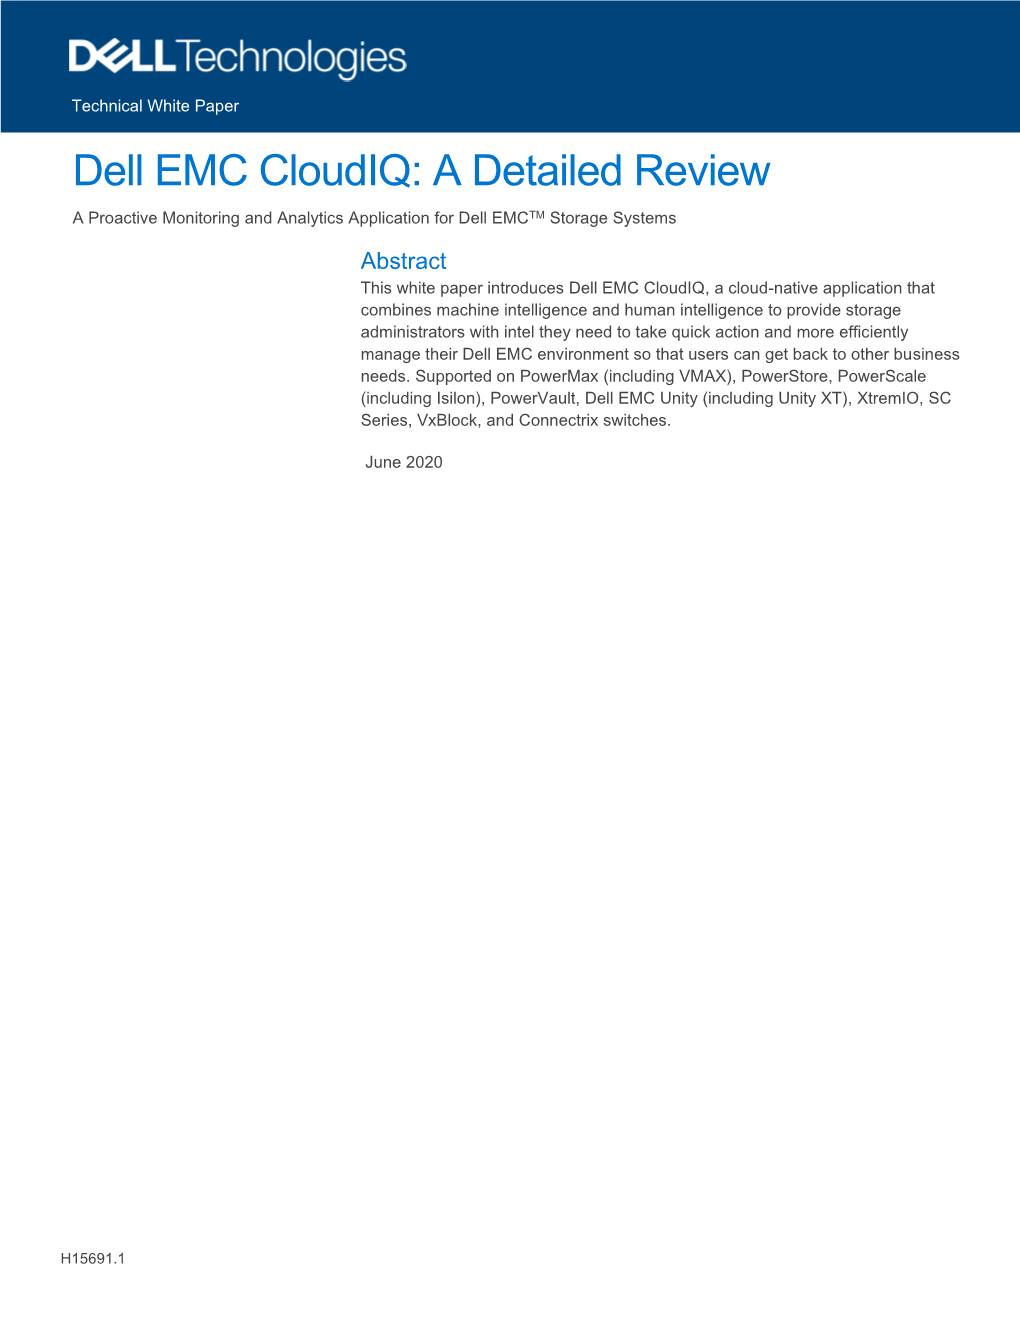 Dell EMC Cloudiq: a Detailed Review a Proactive Monitoring and Analytics Application for Dell EMCTM Storage Systems